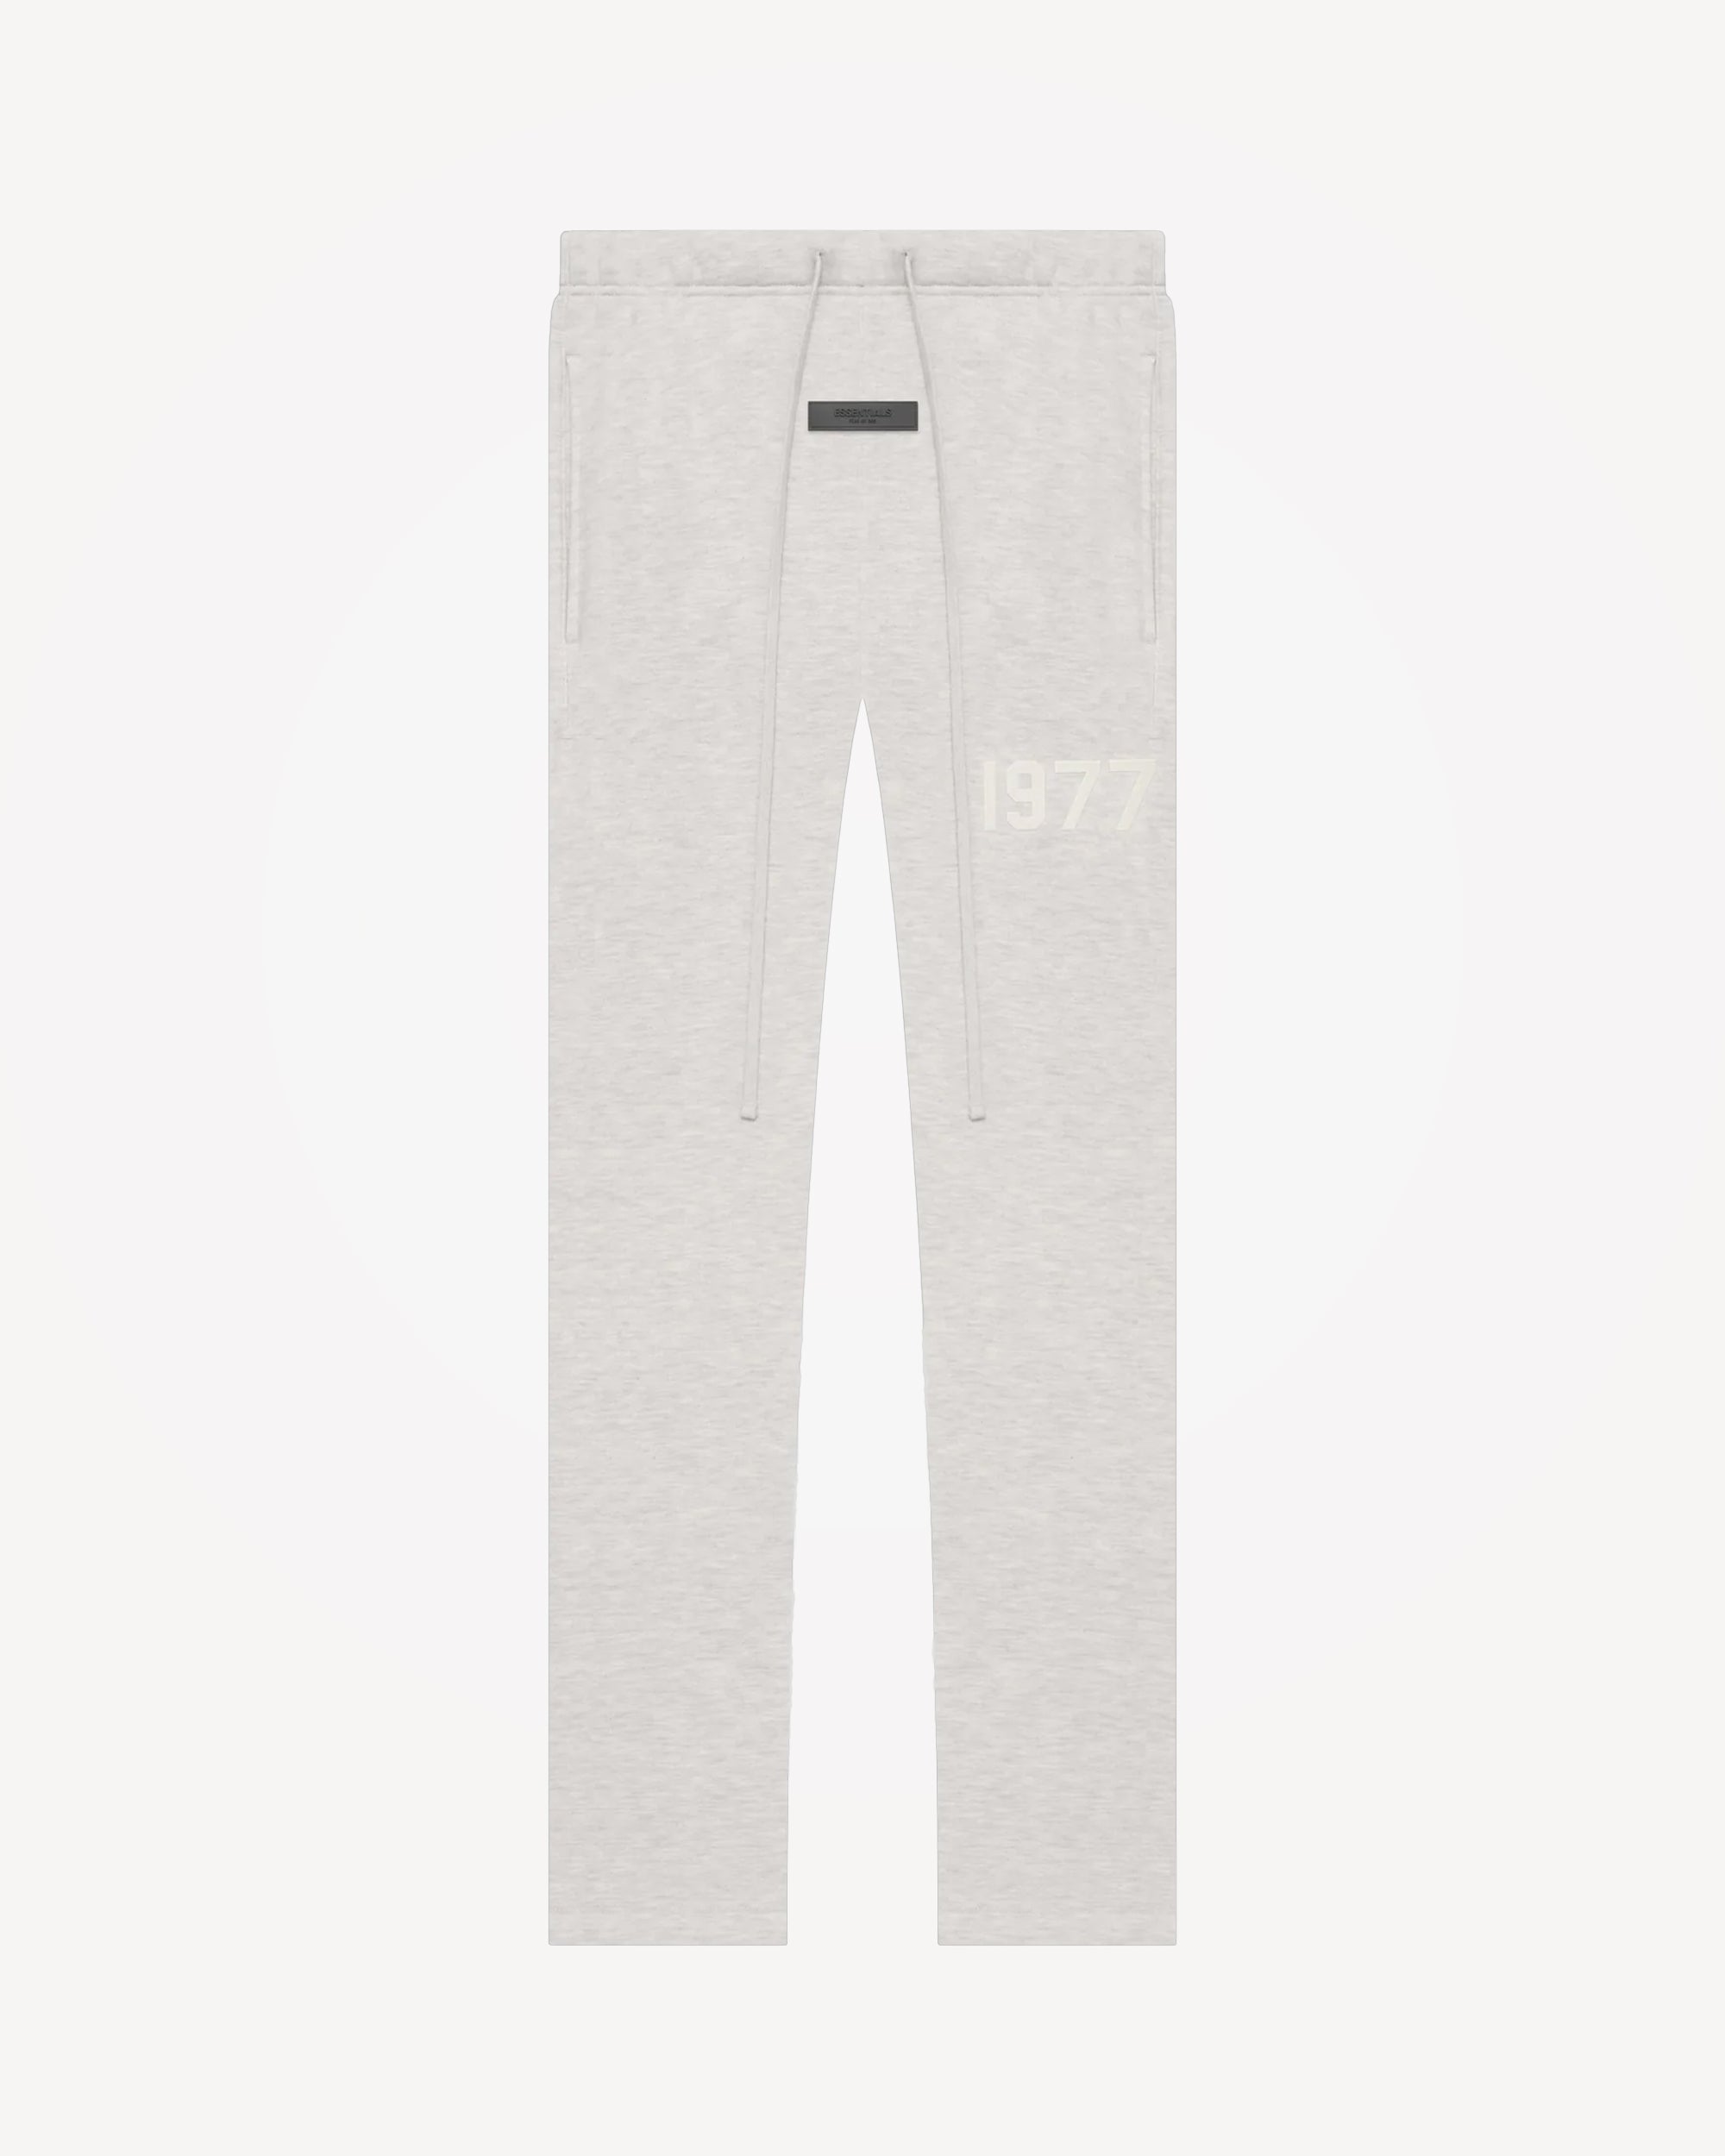 Men's Relaxed Sweatpant in Light Oatmeal